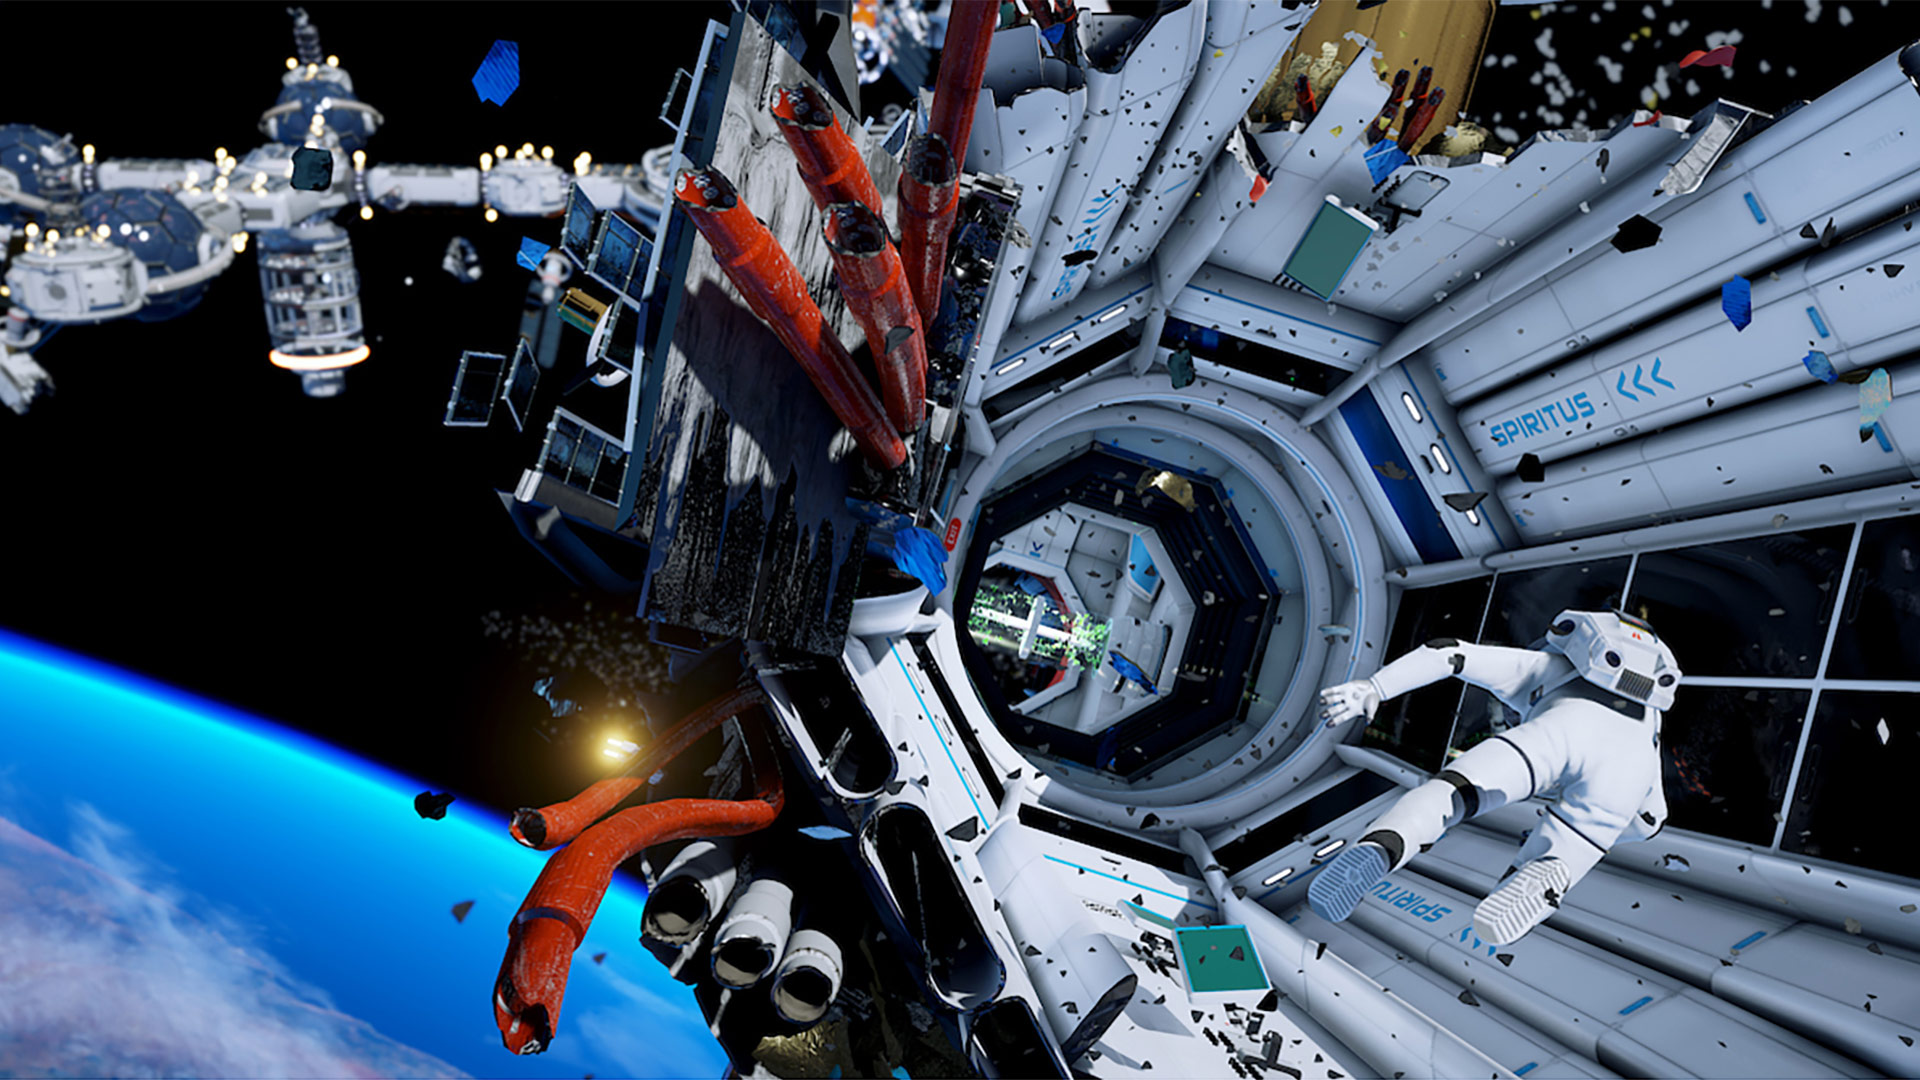 ADR1FT Wallpapers